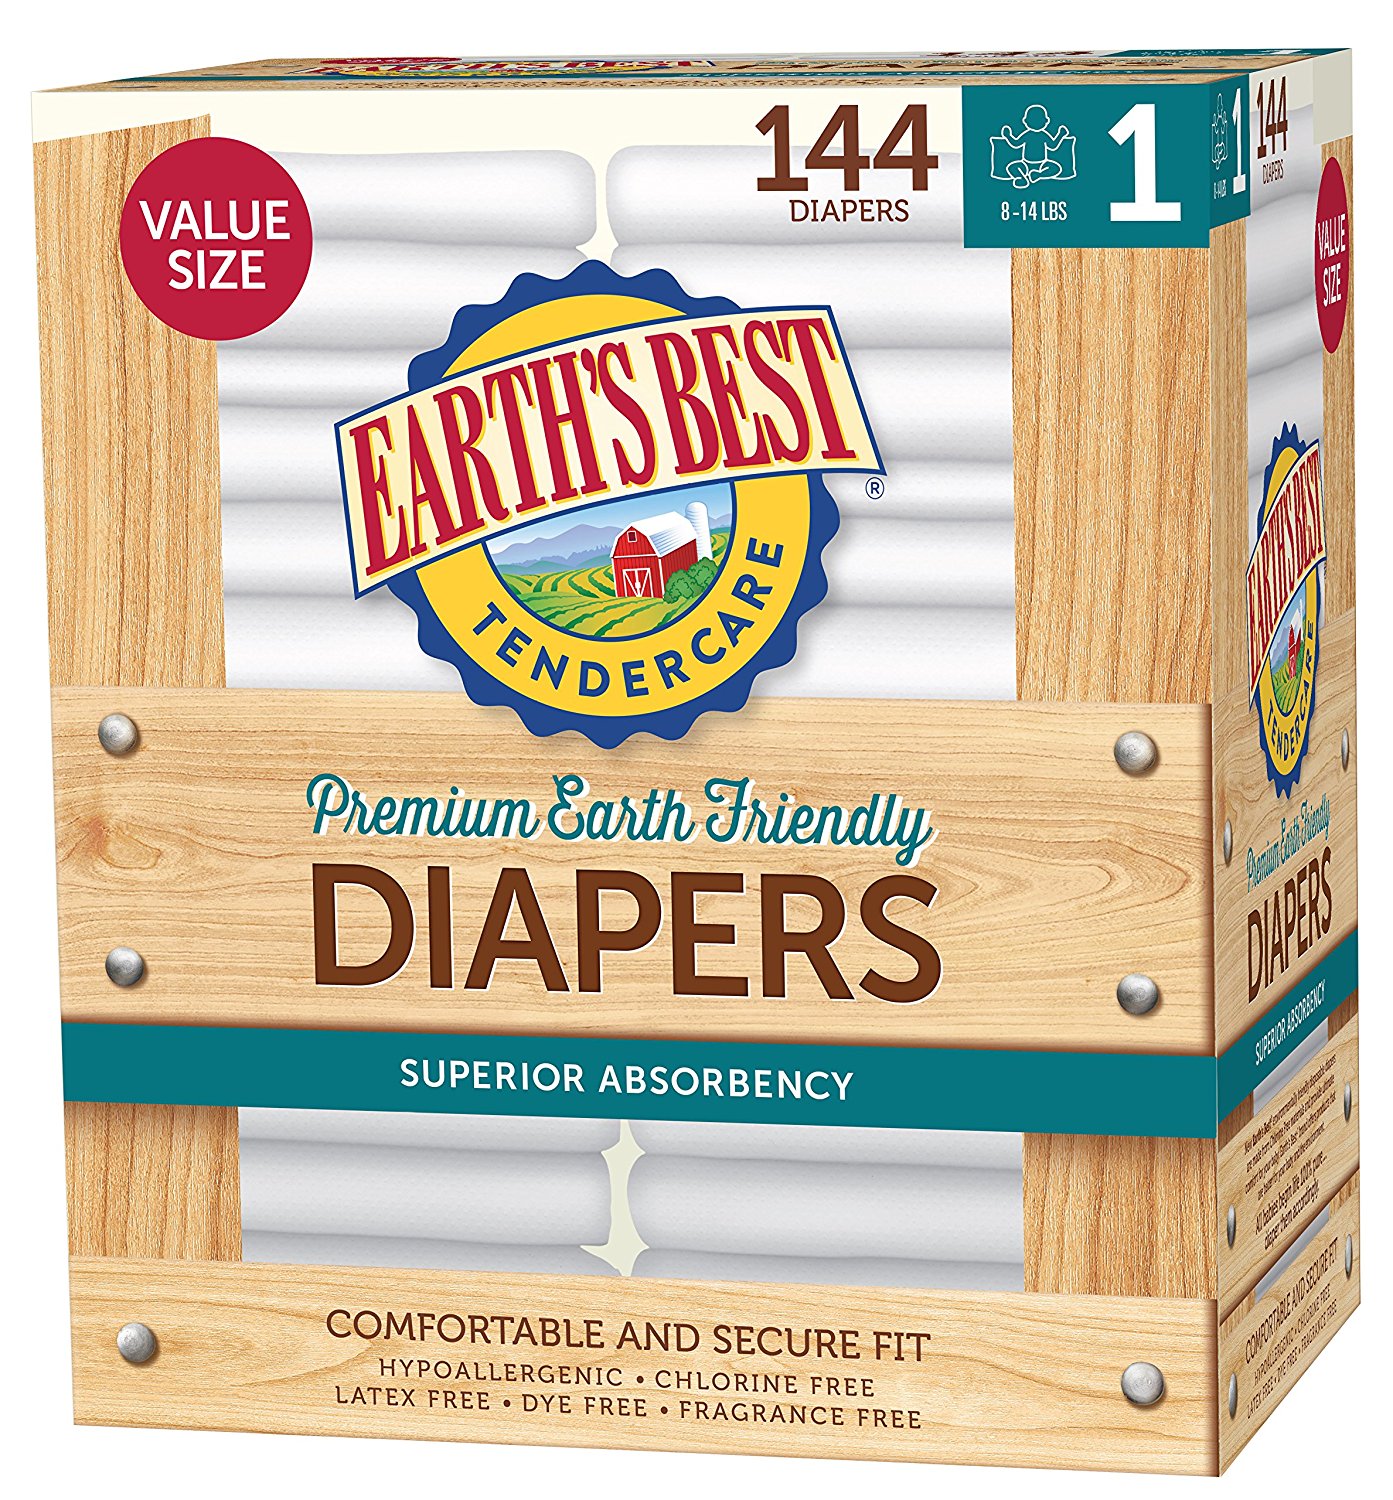 earth's best chlorine free diapers, earth's best diapers, eco-friendly diapers, disposable diapers, best disposable diapers